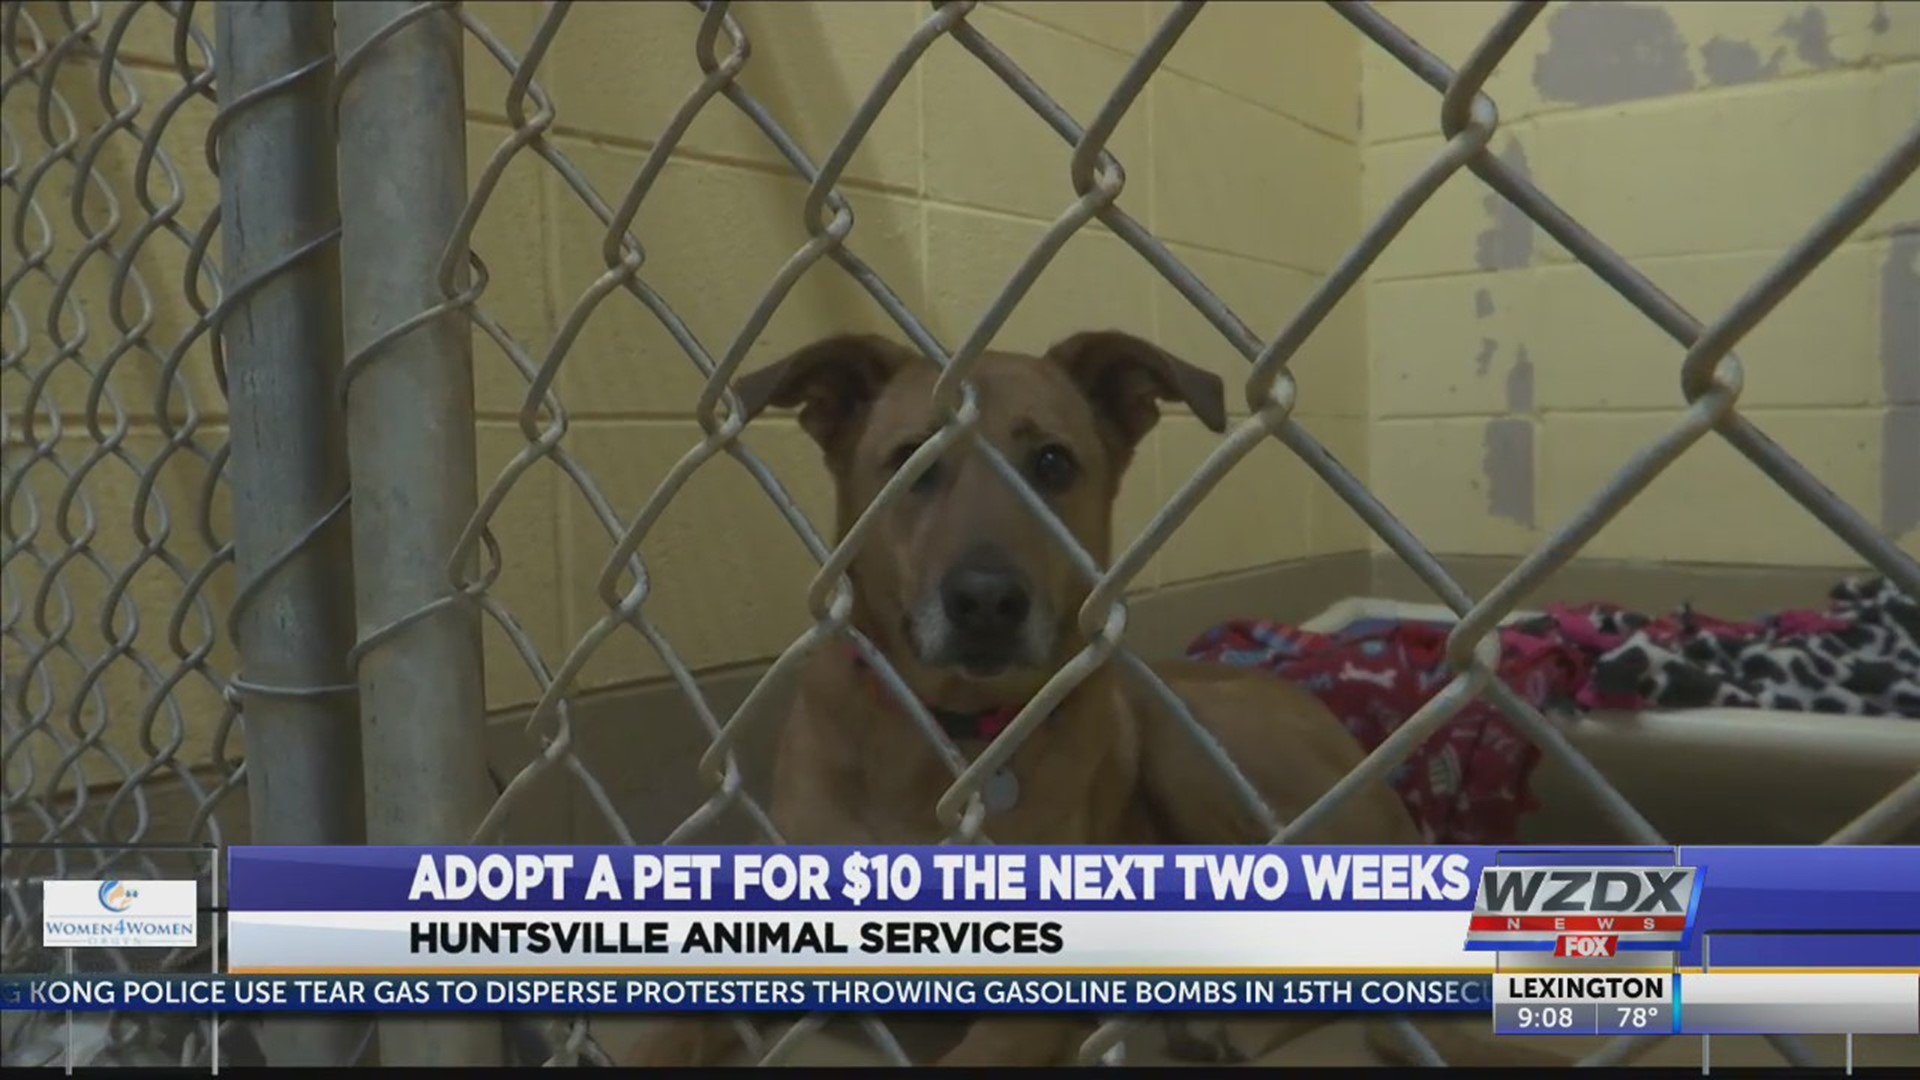 A new four-legged friend could be waiting for you at Huntsville Animals Services, and they have an extra sweet adoption special starting Monday.